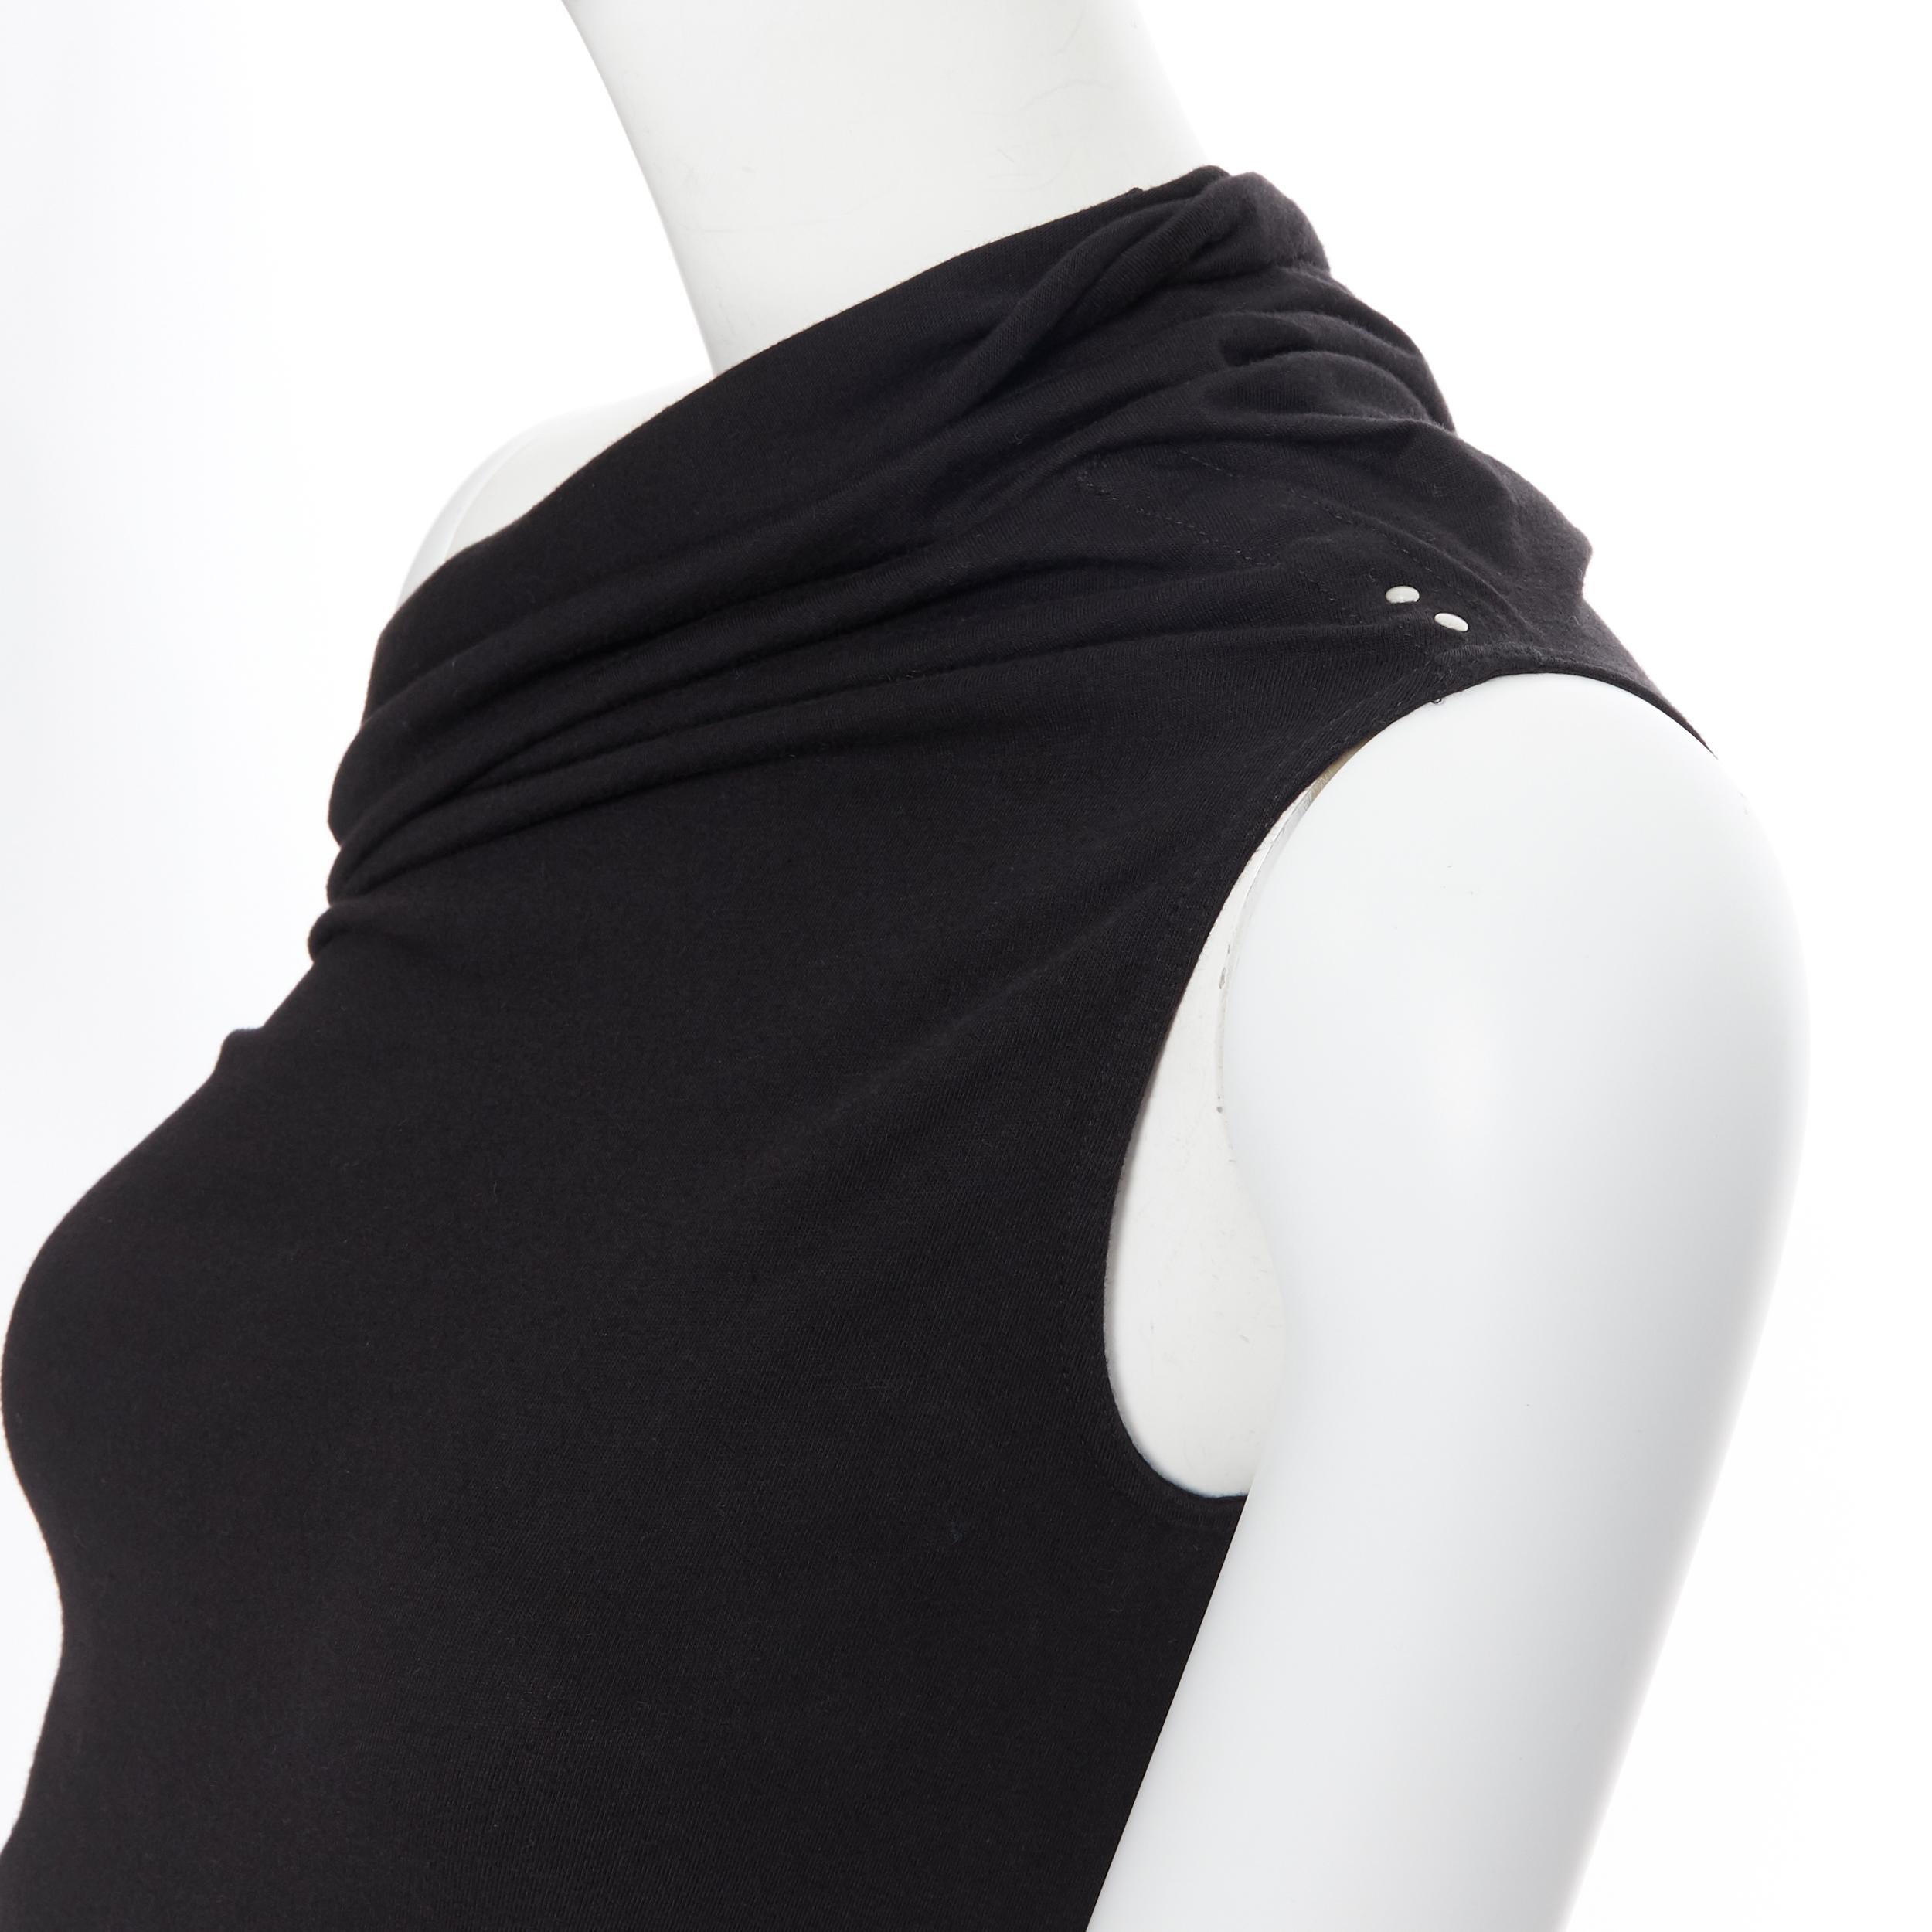 new RICK OWENS AW18 Sisyphus black cotton studded one shoulder top IT42 M
Brand: Rick Owens
Designer: Rick Owens
Collection: Fall Winter 2018
Model Name / Style: One shoulder top
Material: Cotton
Color: Black
Pattern: Solid
Extra Detail: Stretch fit